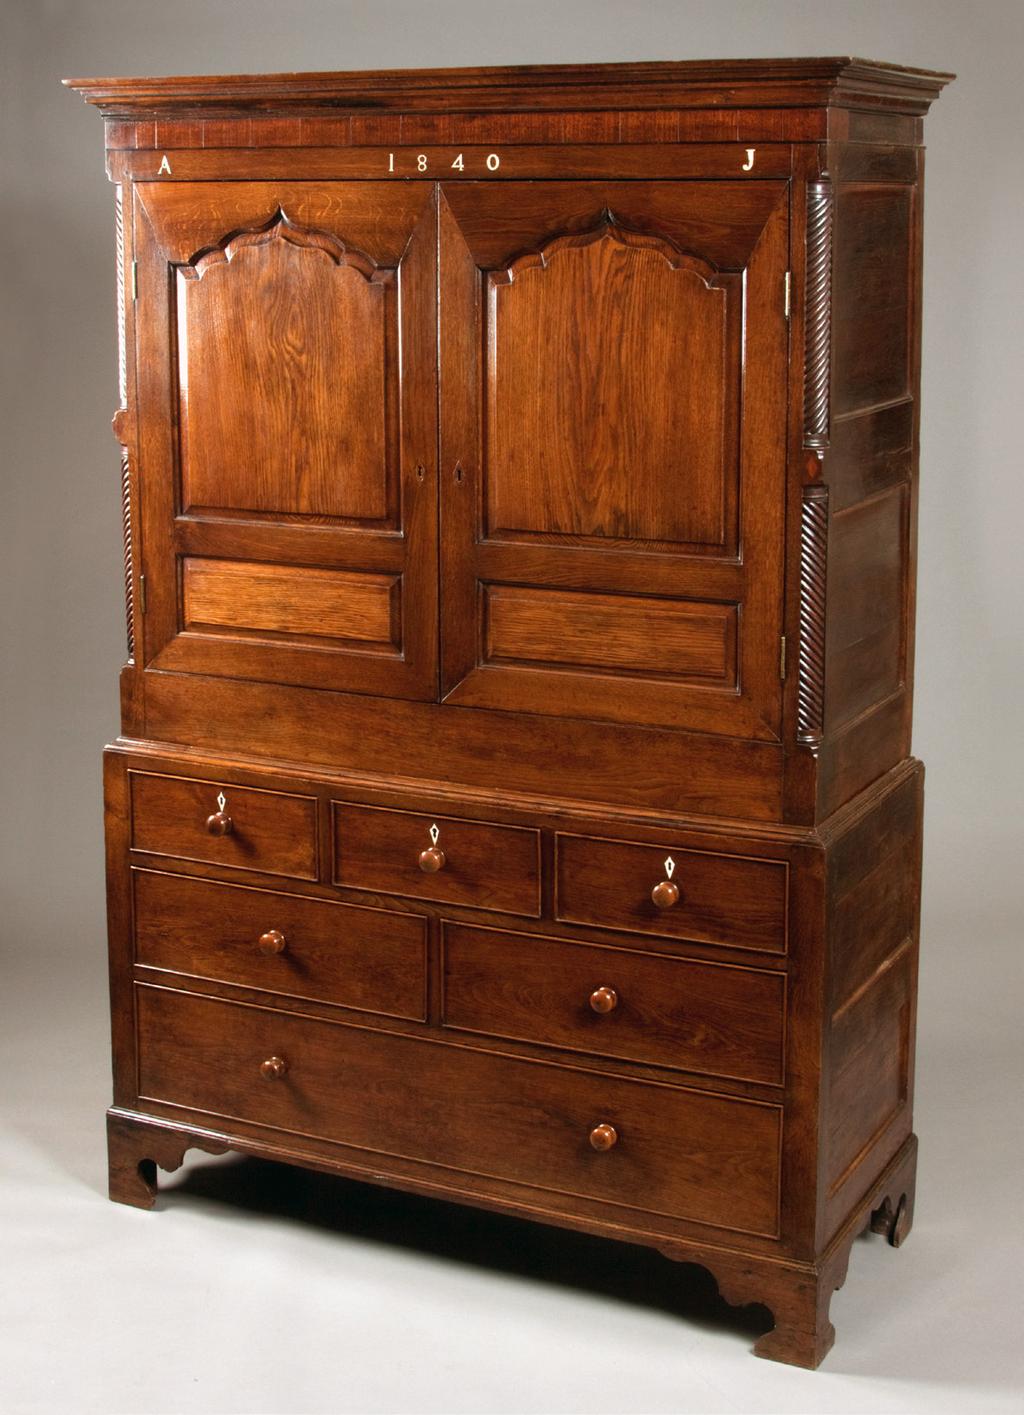 09 2016 TIM BOWEN ANTIQUES 1 Oak linen press 4650 Cwpwrdd prés derw Wonderful Welsh oak linen press, which is superbly made with some unusual detail, such as the mahogany and bog oak banded frieze